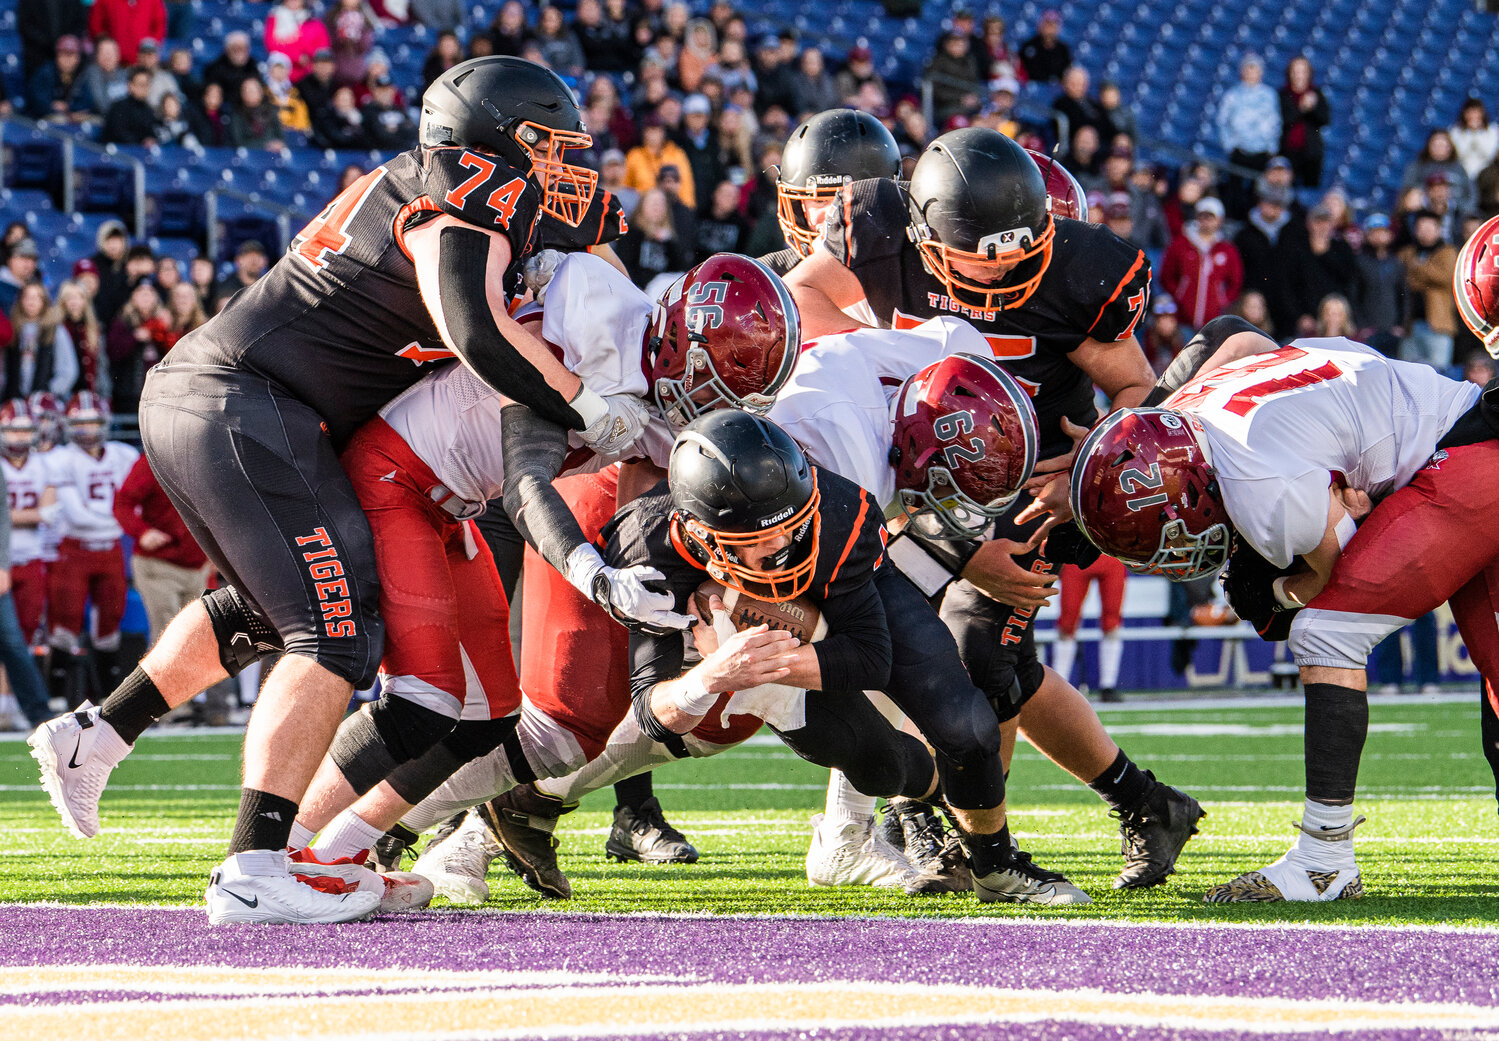 Napavine quarterback Ashton Demarest throws himself into the end zone for a touchdown during the 2B State Championship game against Okanogan at Husky Stadium on Saturday, Dec. 2.